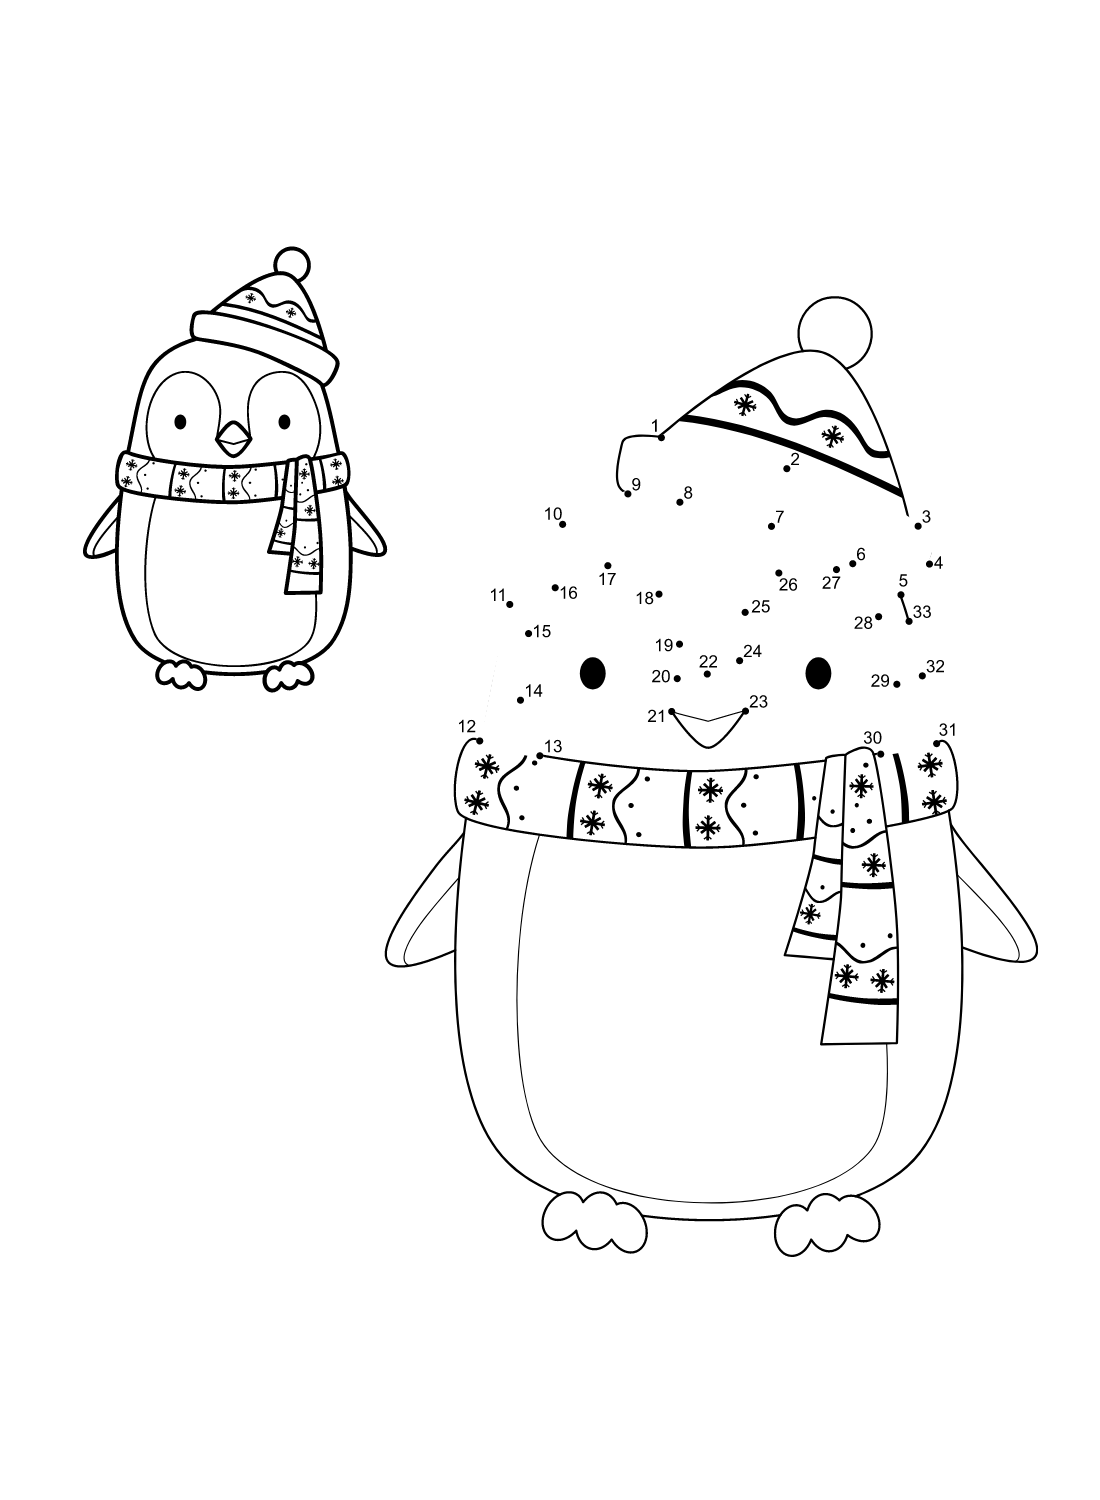 Penguin Dot to Dot Coloring Page